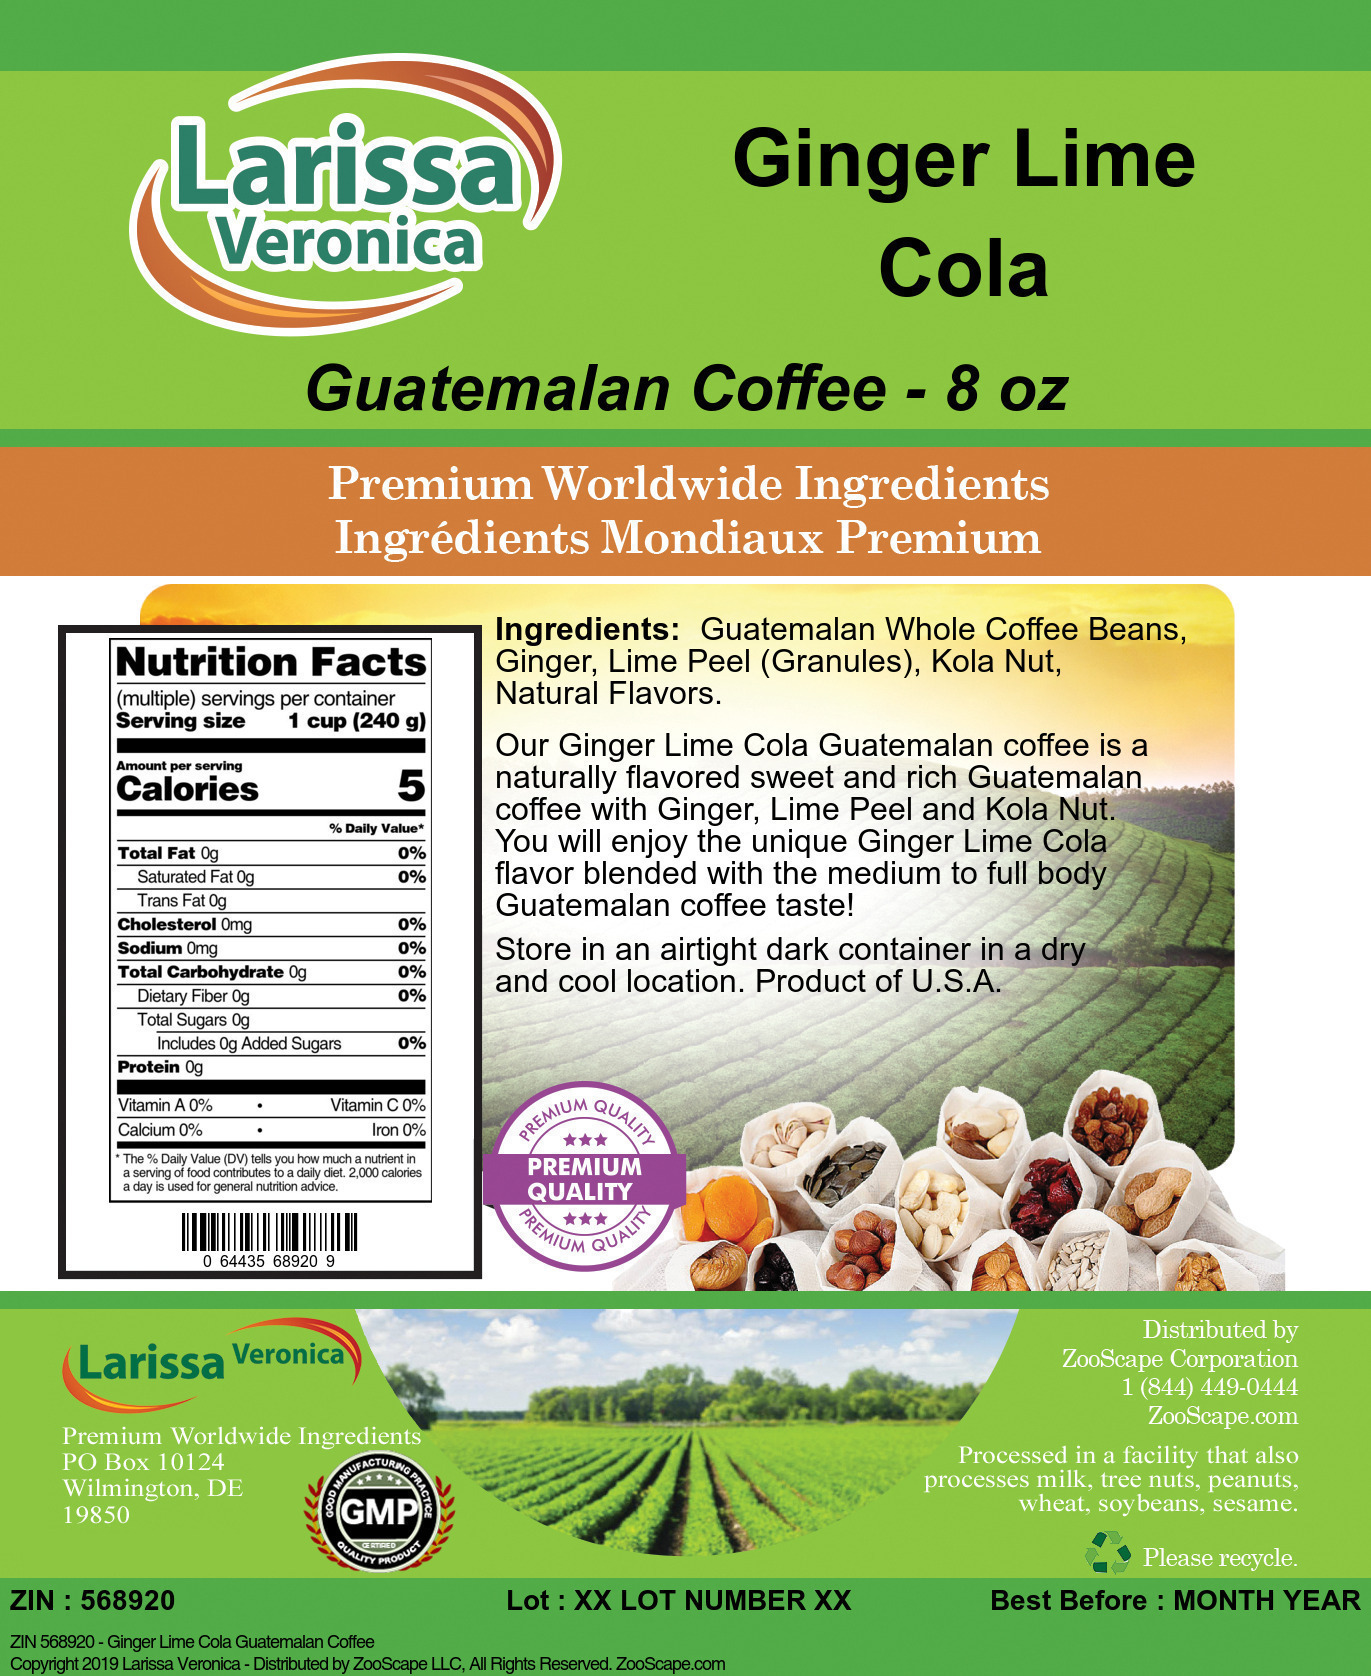 Ginger Lime Cola Guatemalan Coffee - Label